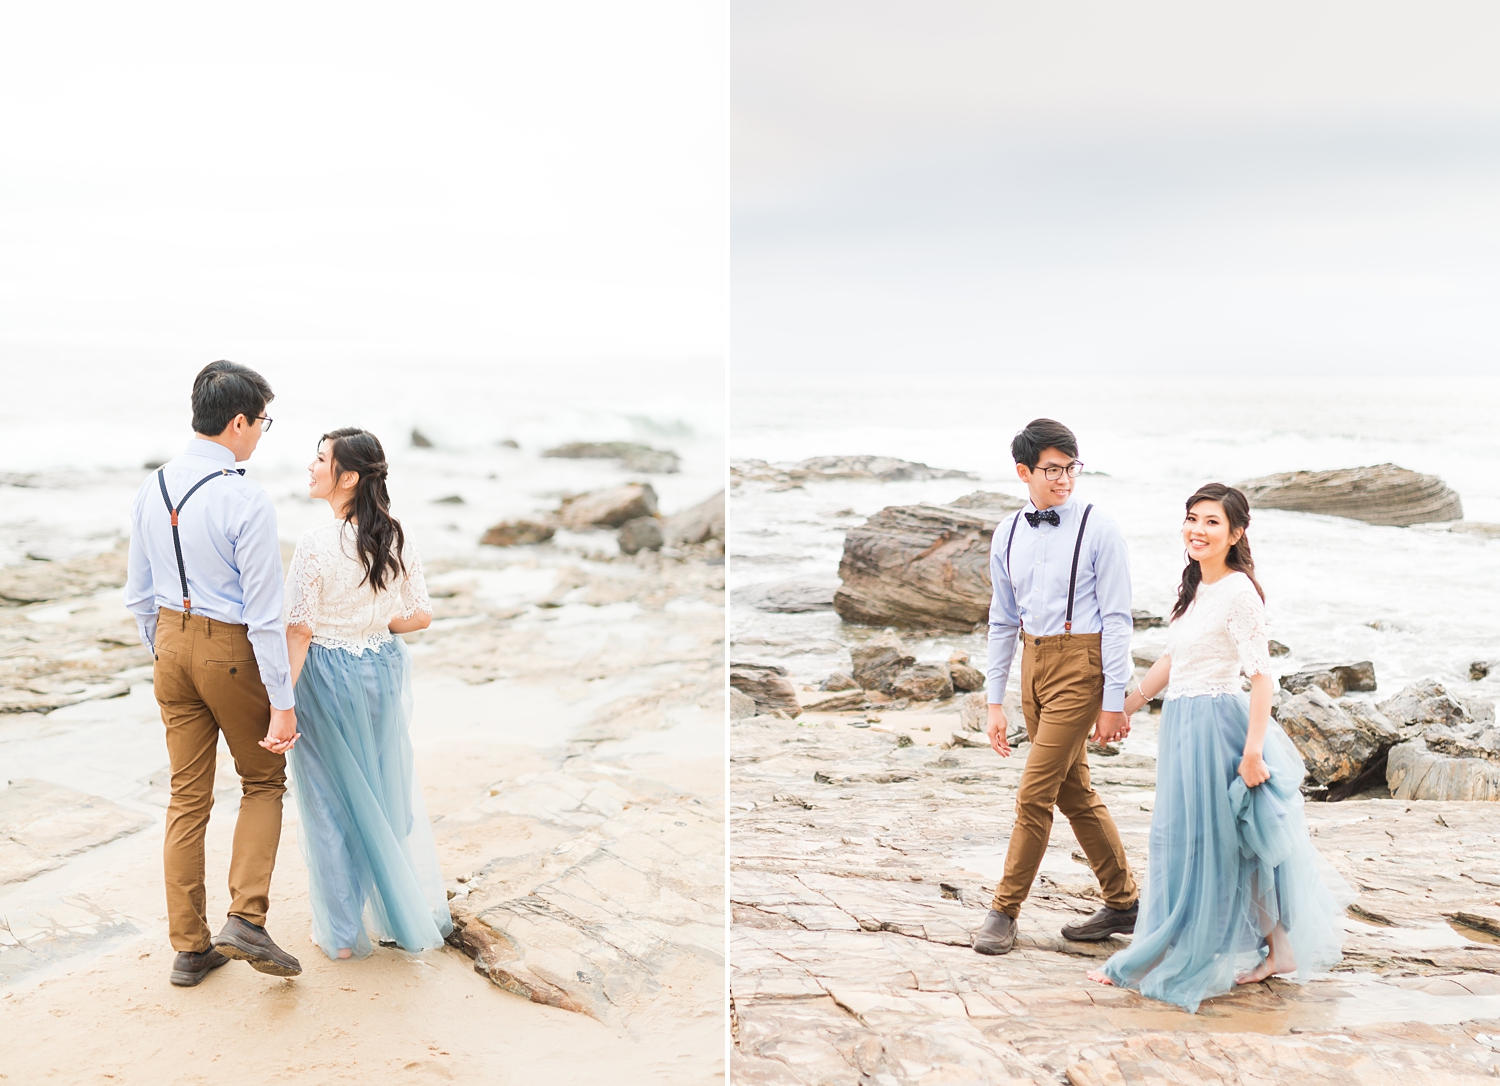 location ideas for engagement photos in southern california_0171.jpg